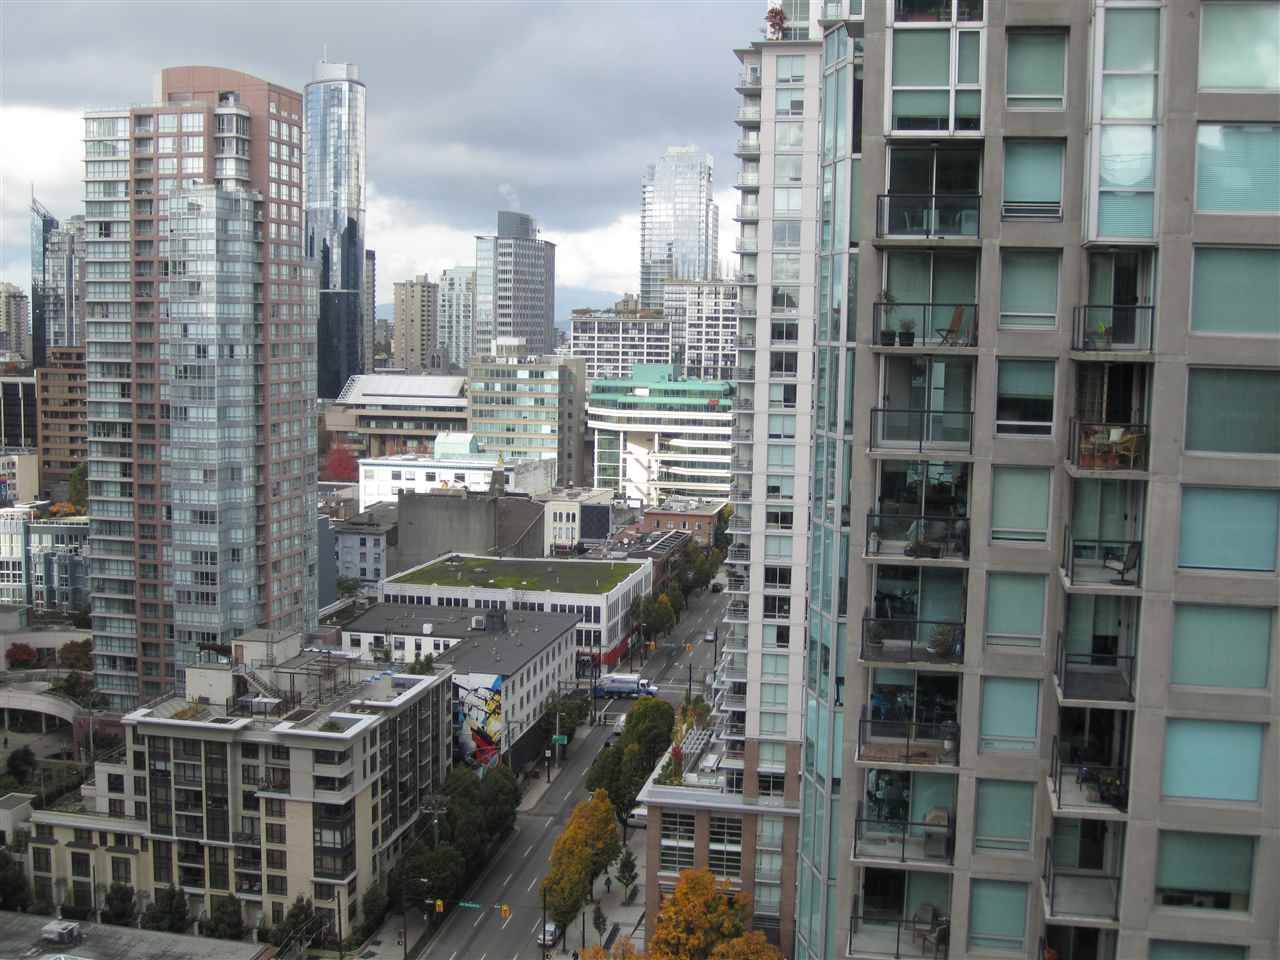 Main Photo: 2502 888 HOMER STREET in Vancouver: Downtown VW Condo for sale (Vancouver West)  : MLS®# R2478921